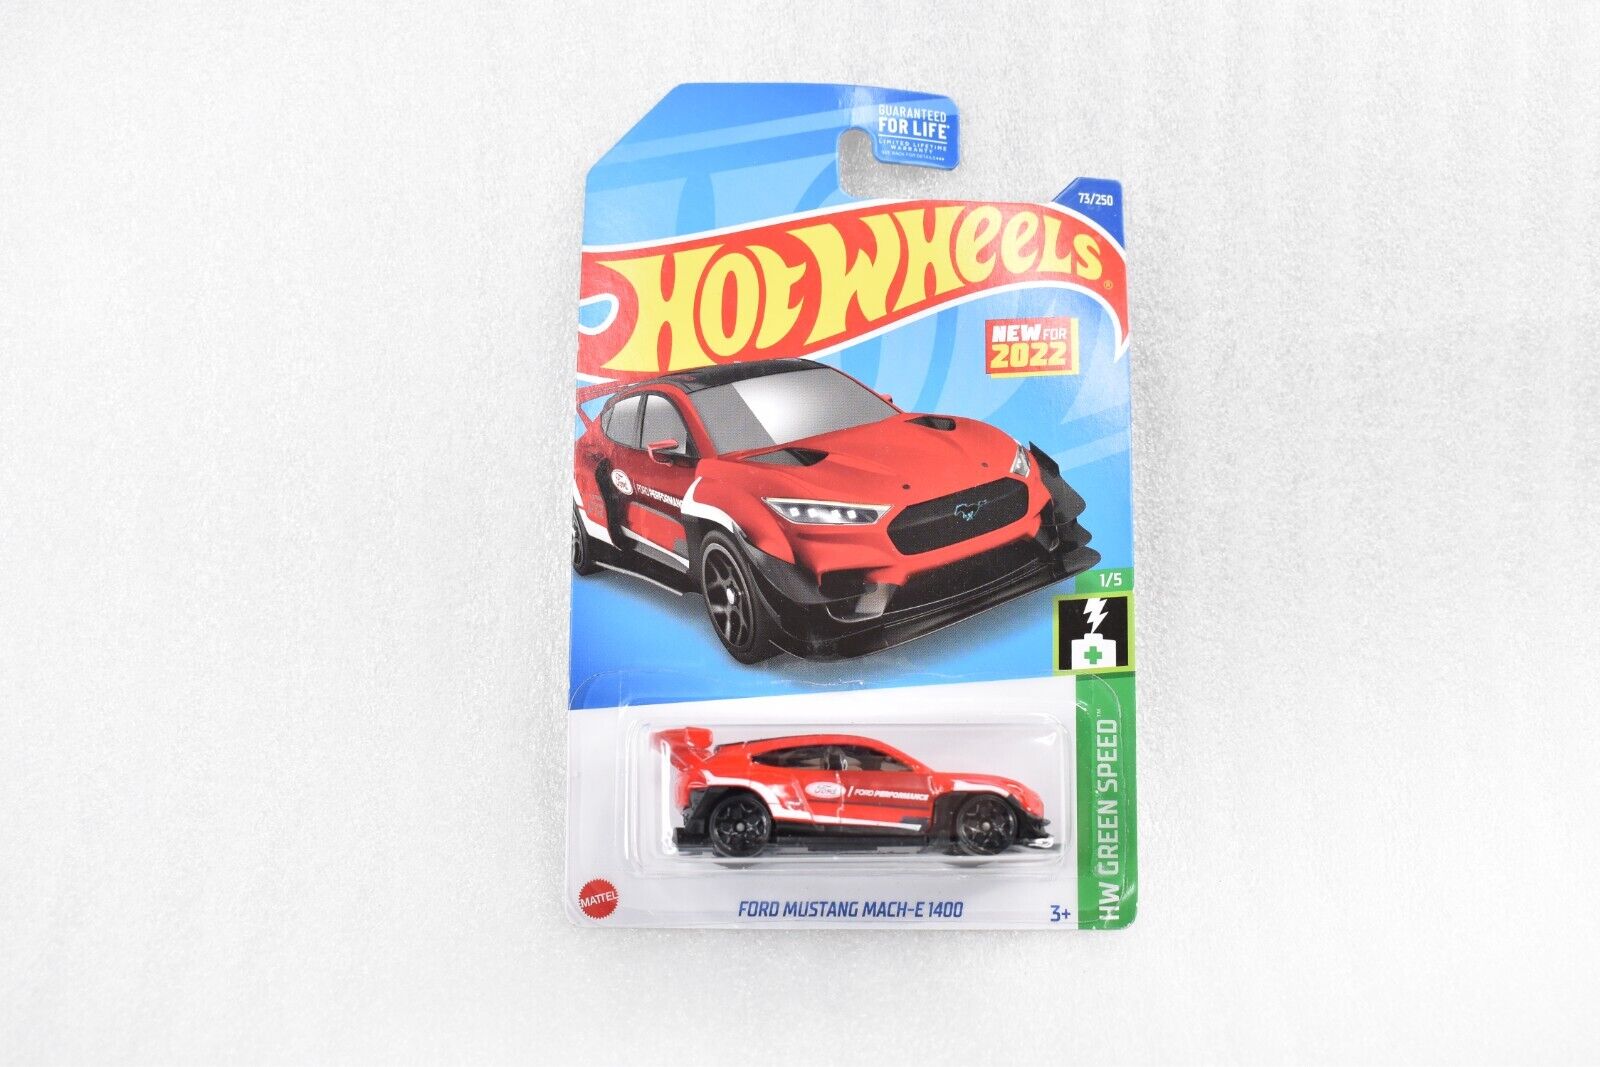 2022 Hot Wheels Ford Mustang Mach E 1400 Red HW GREEN SPEED 1/5